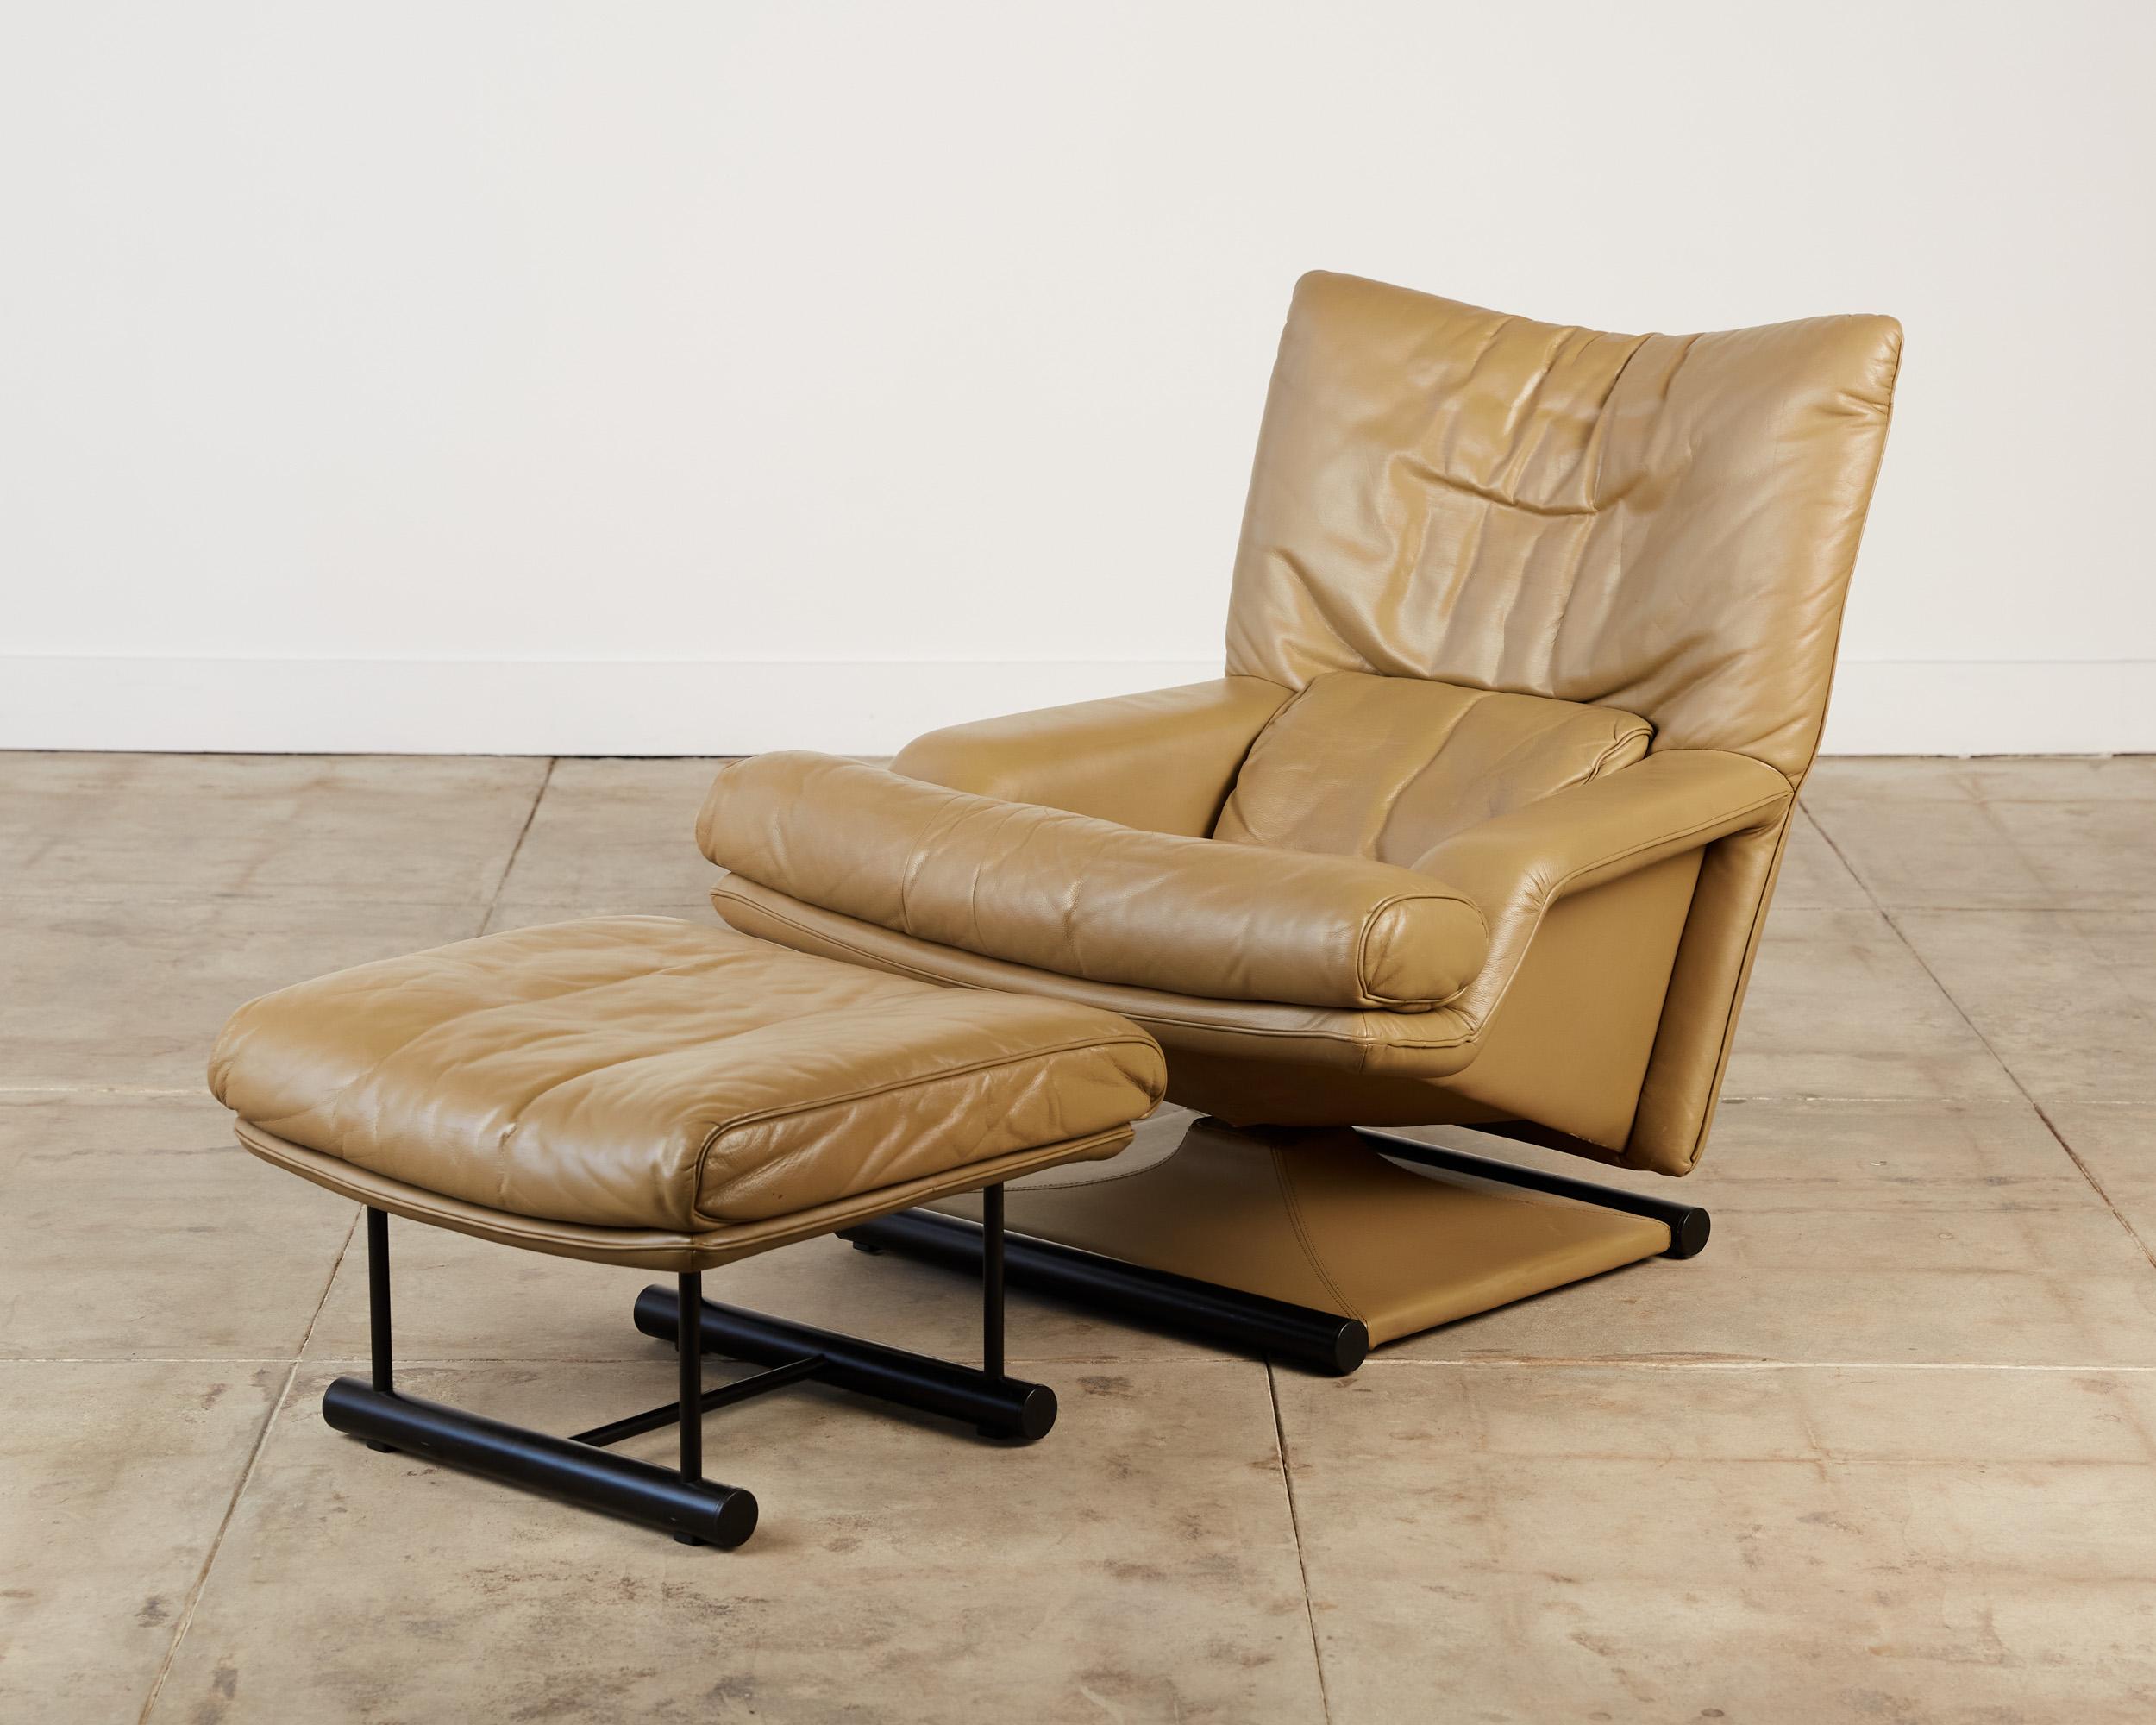 Lounge chair and ottoman designed by Mathias Hoffmann for Rolf Benz, Germany, c.1980s. The set was made for US export to be sold by American retailer Cy Mann. It features a fully upholstered tan leather body and base with two black painted metal